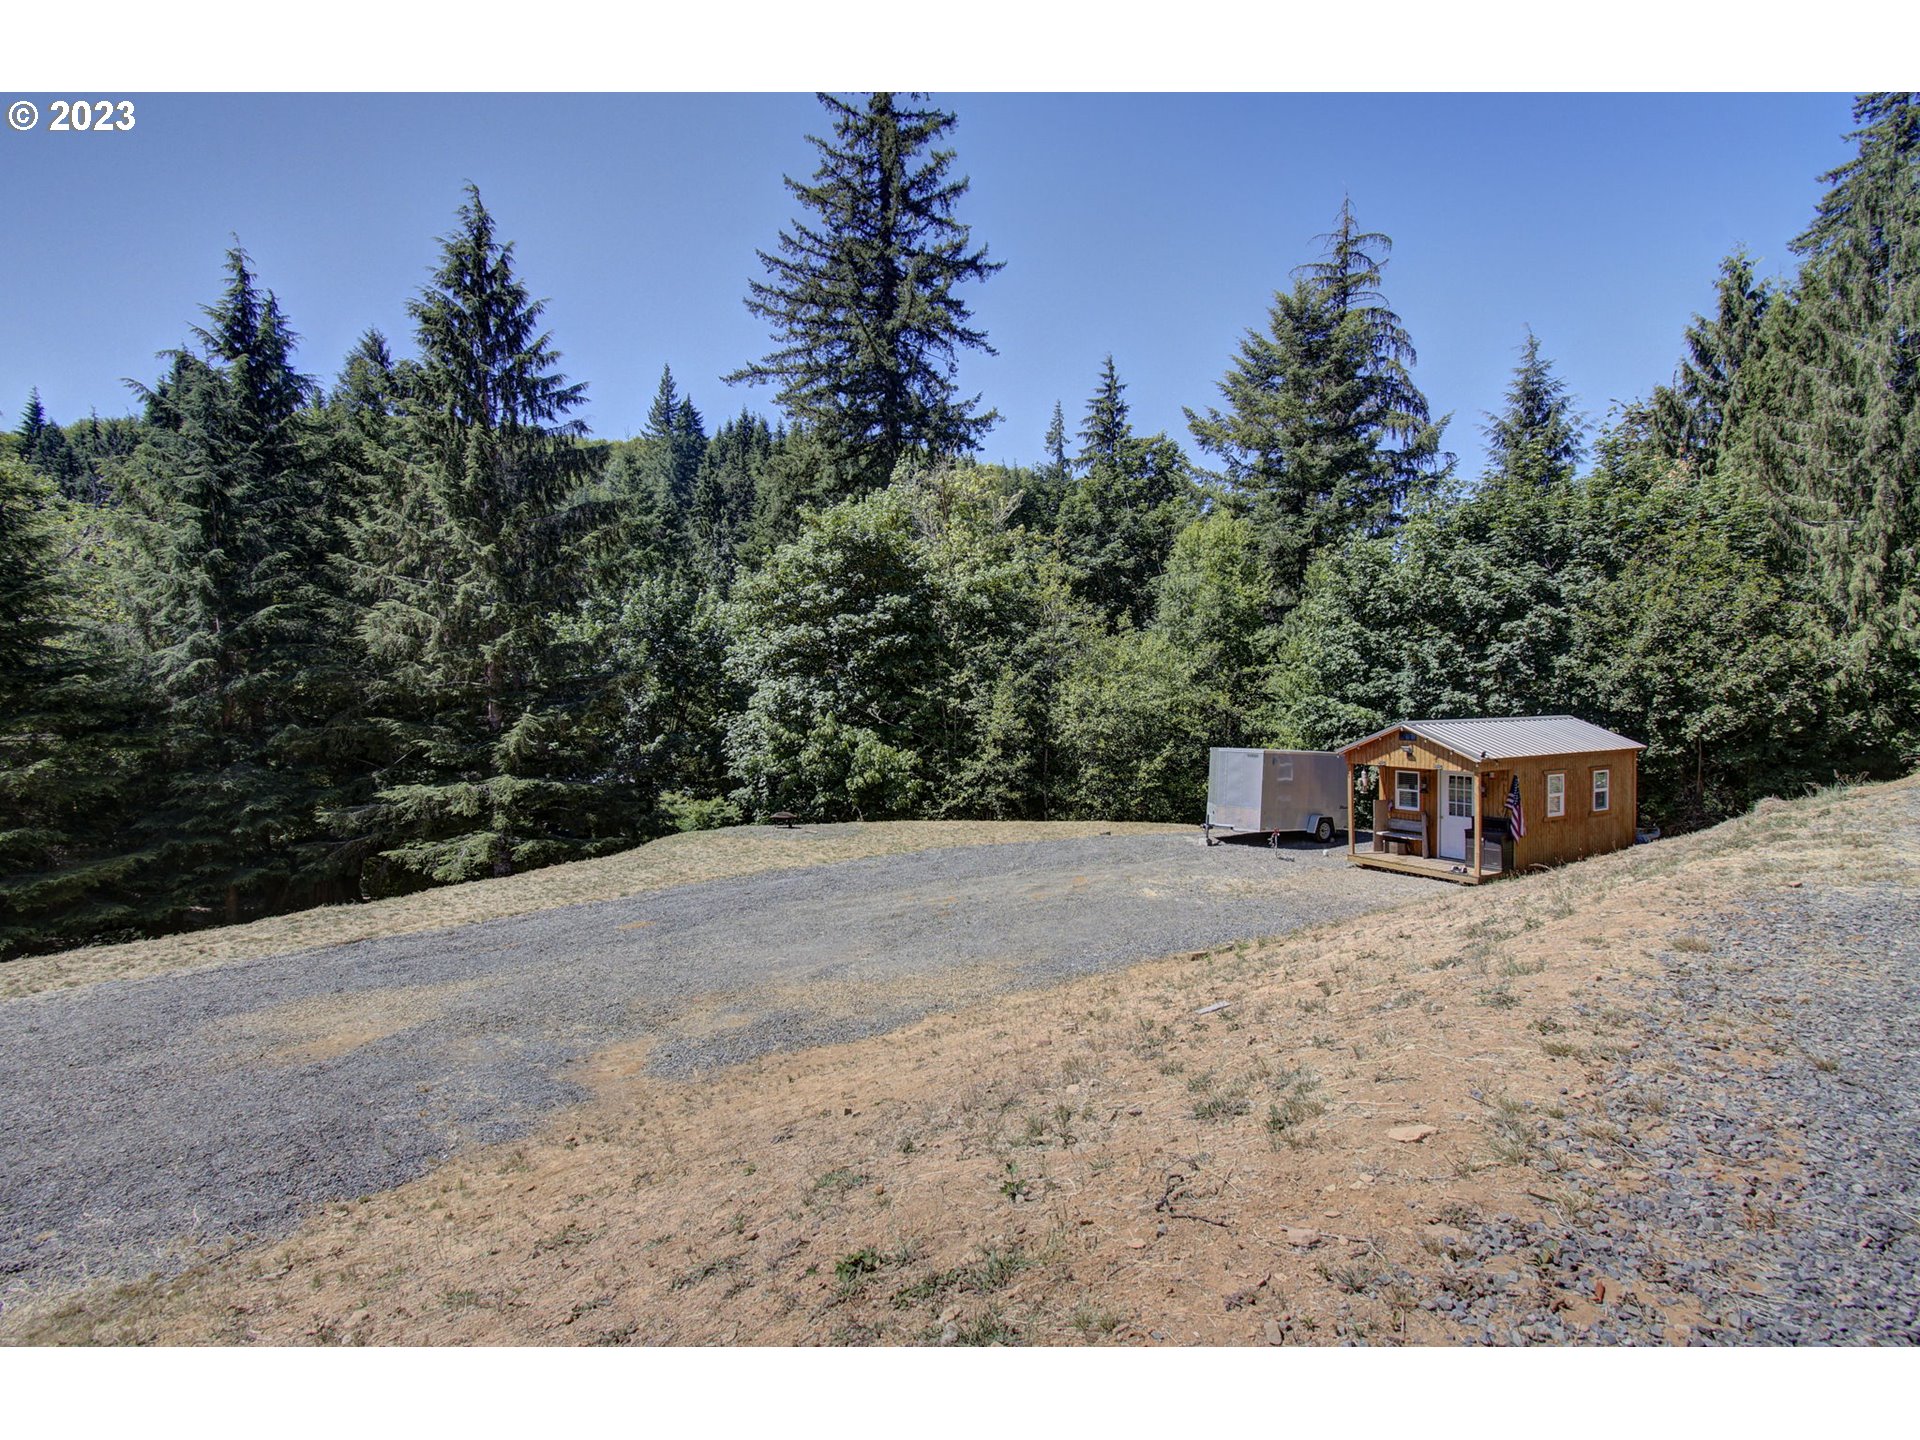 Tiny Homes for Sale in Clatsop County, OR